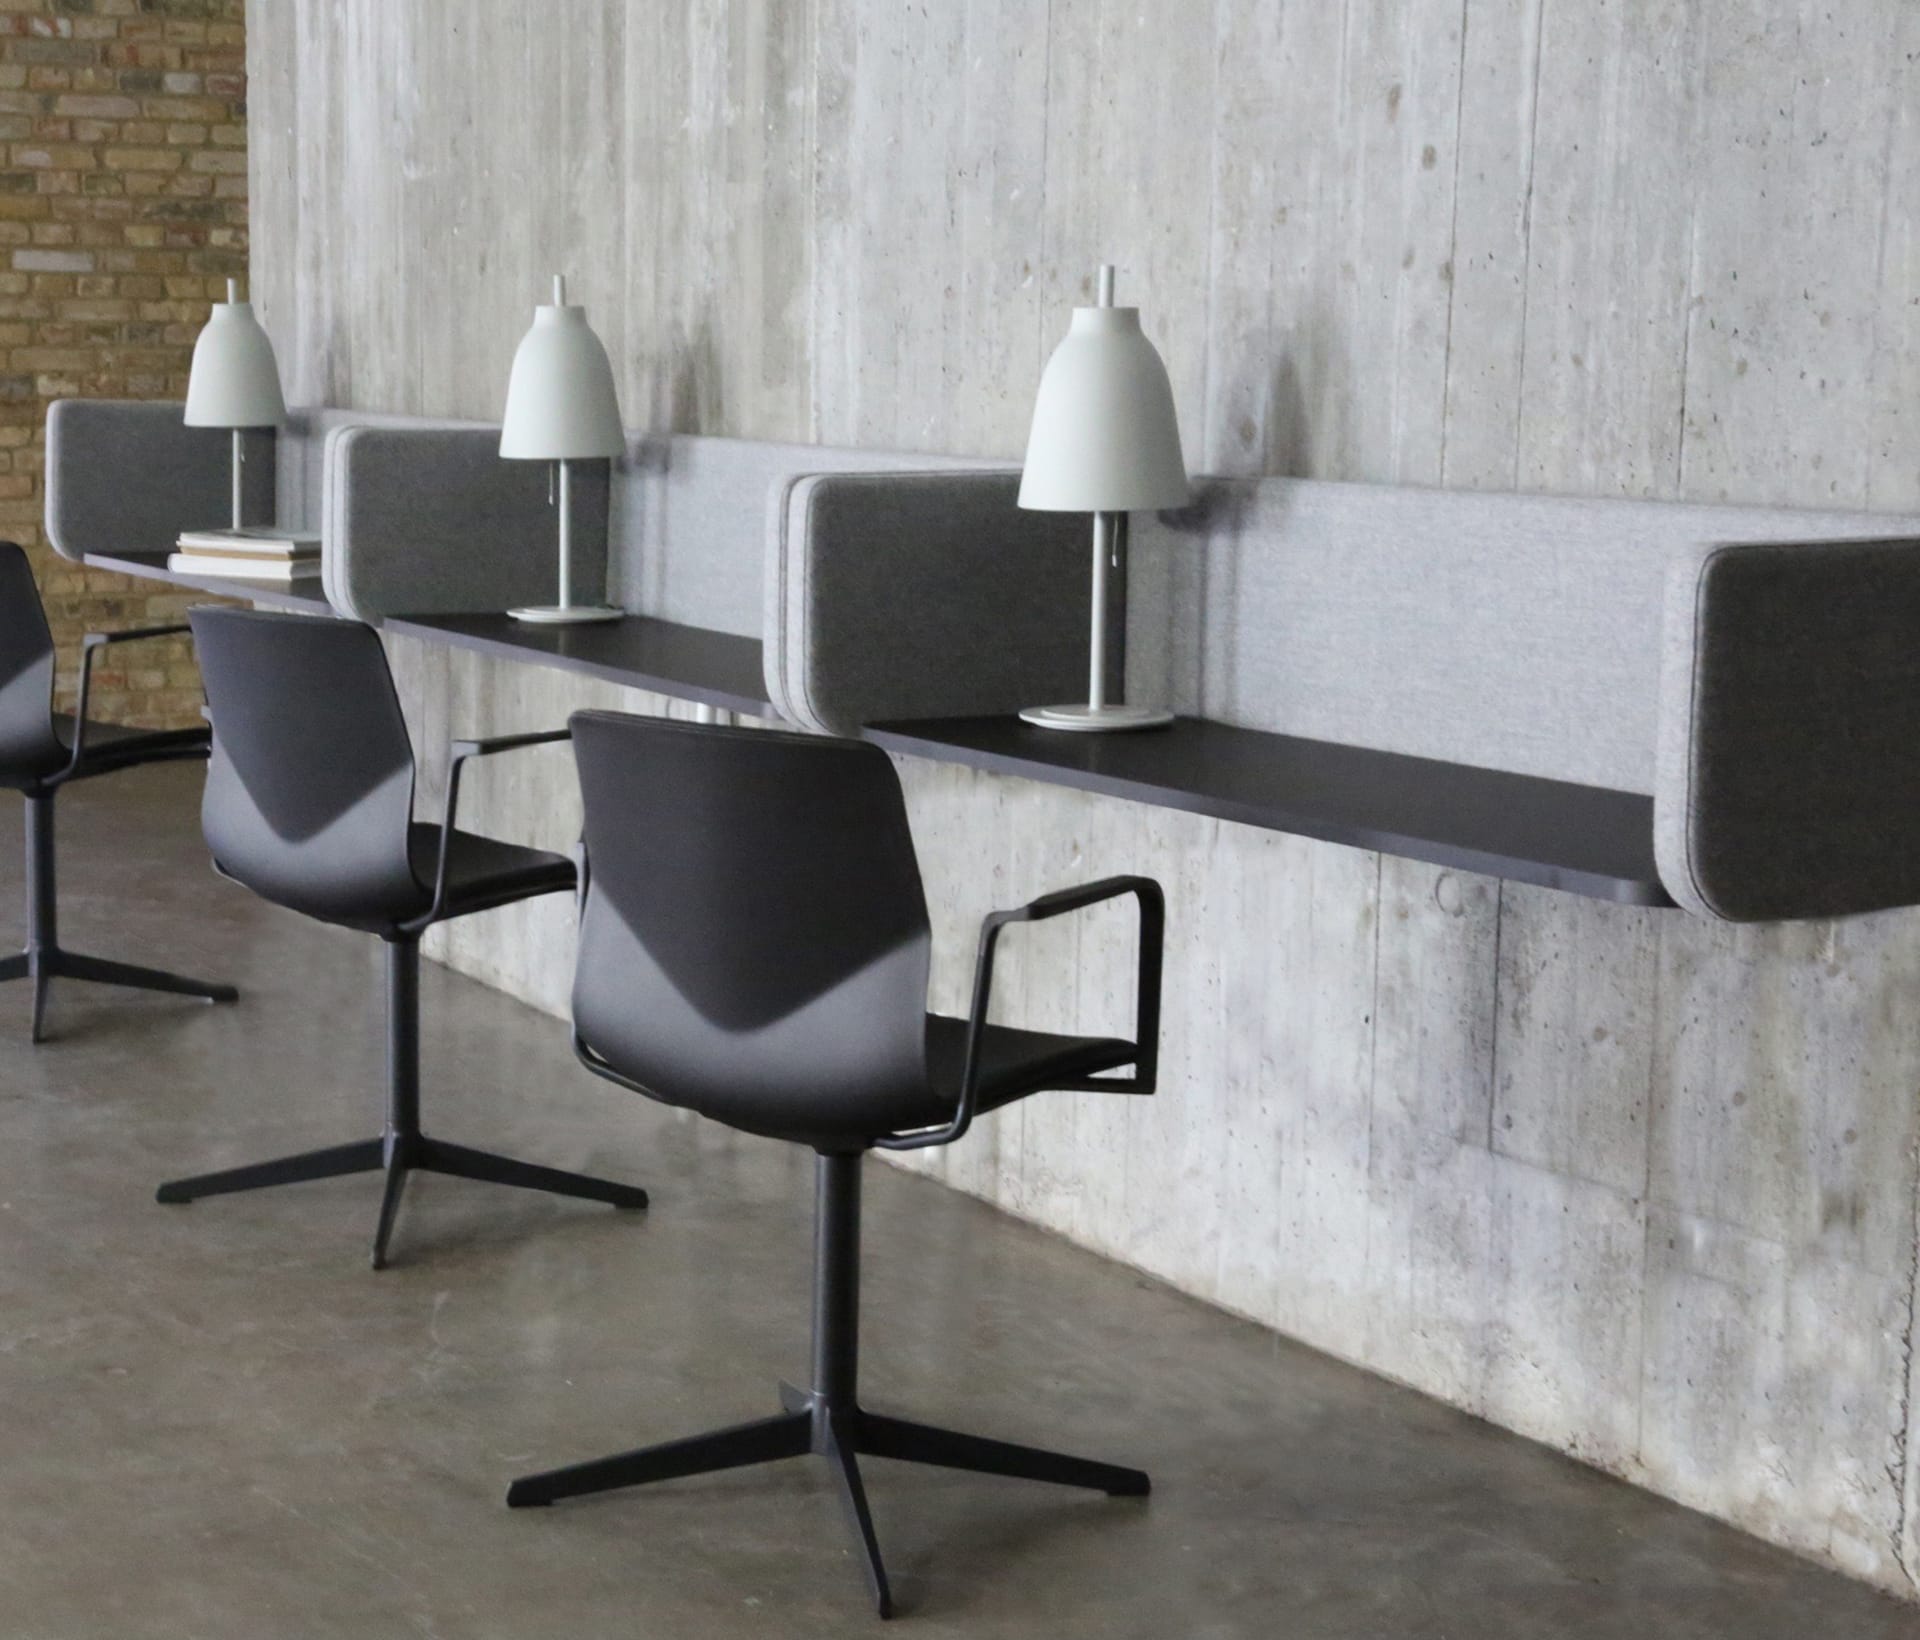 A chair and three wall mounted desk workstations